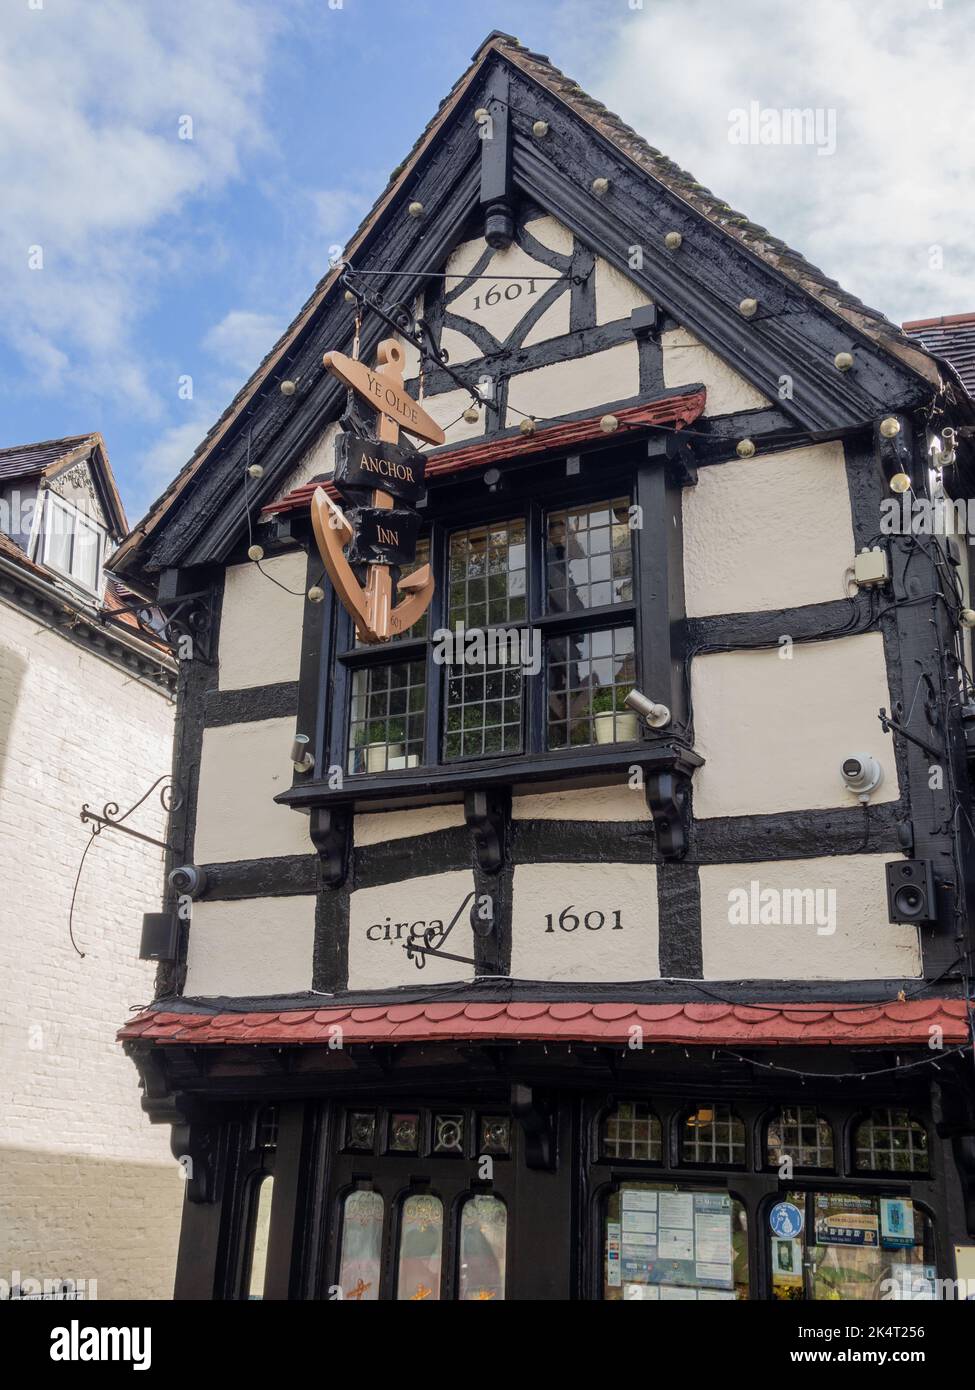 Ye Olde Anchor Inn, a traditional timber framed pub dating from 17th century, Upton Upon Severn, Worcestershire, UK Stock Photo